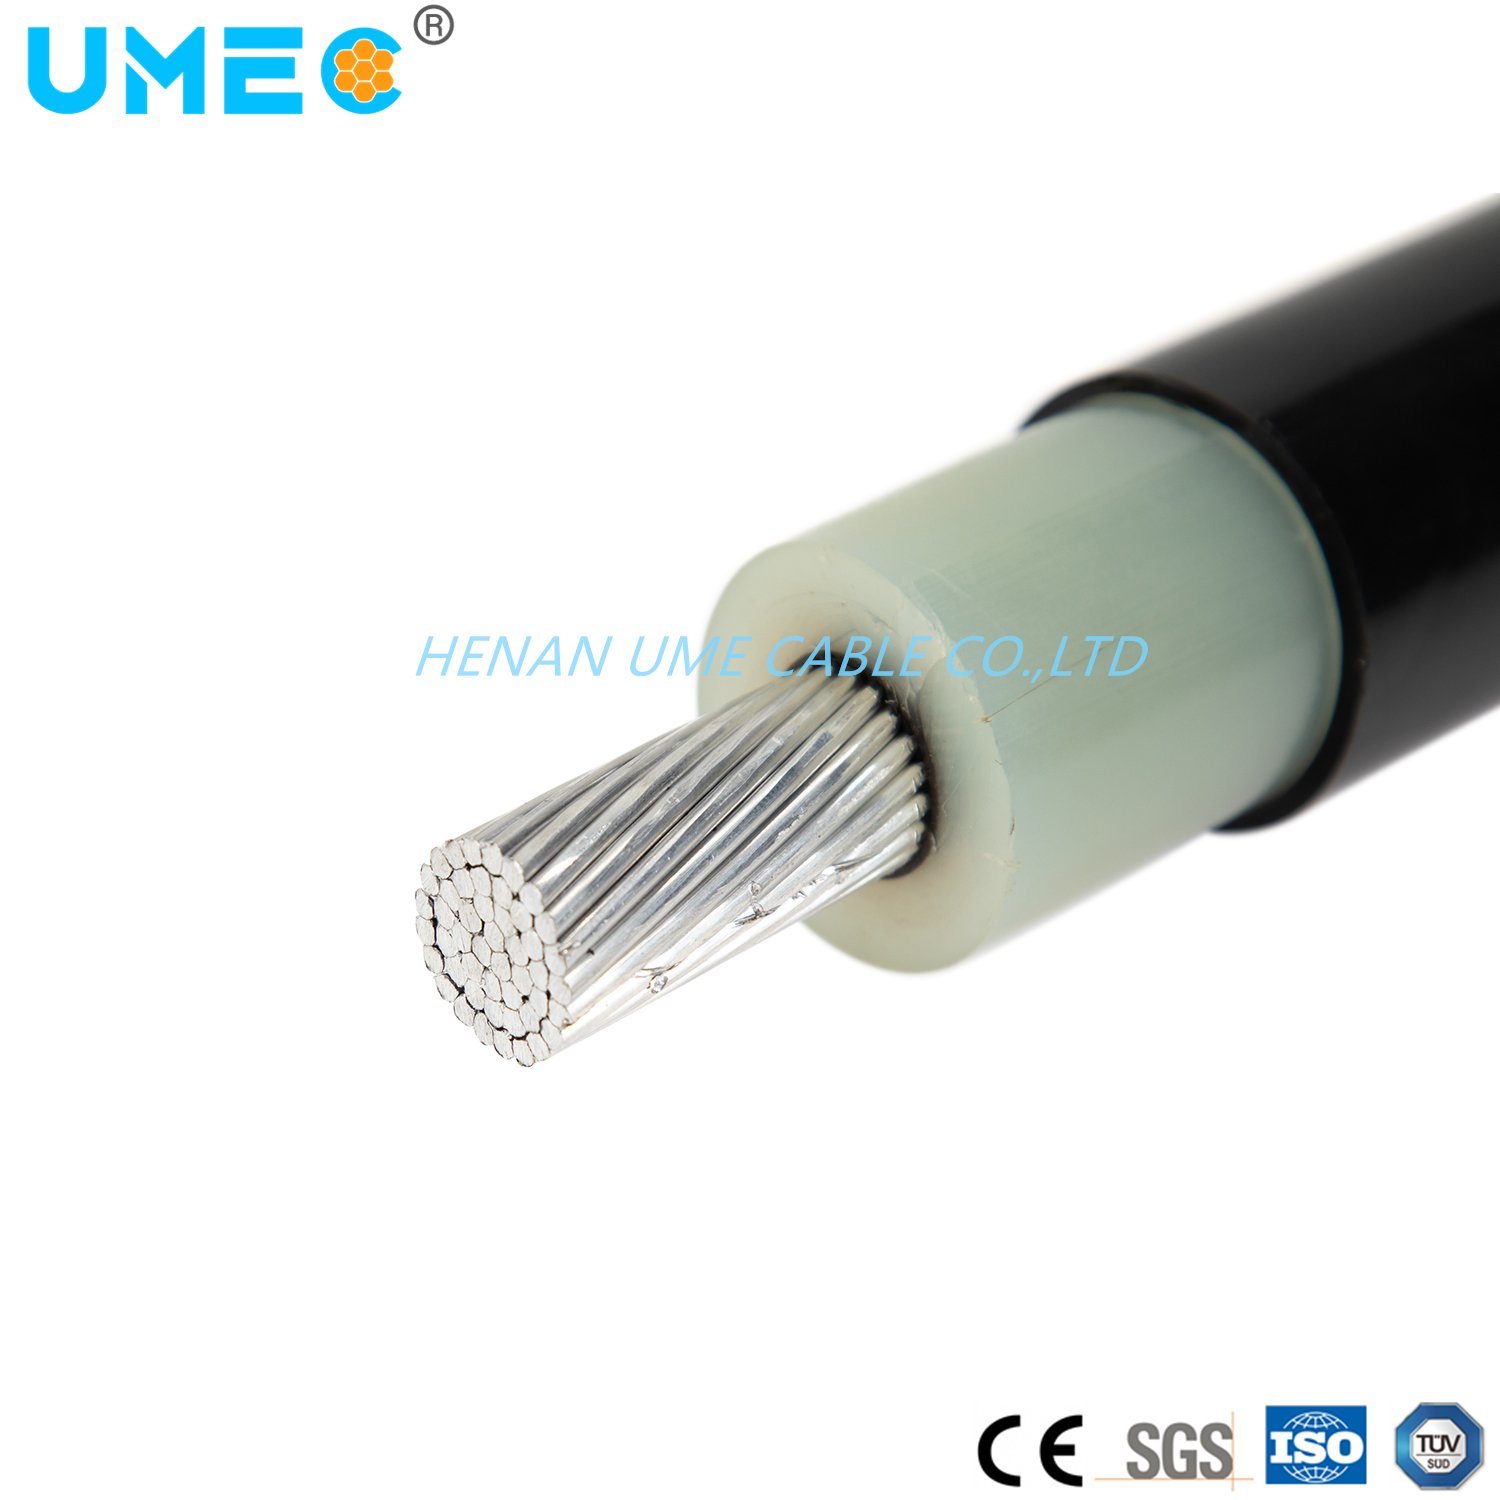 Hv XLPE Cable with Lead Aluminum Alloy Sheath 64/110 (123) Kv 1X70mm2 1X95mm2 1X120mm2 Underground Aluminum Alloy XLPE Cable